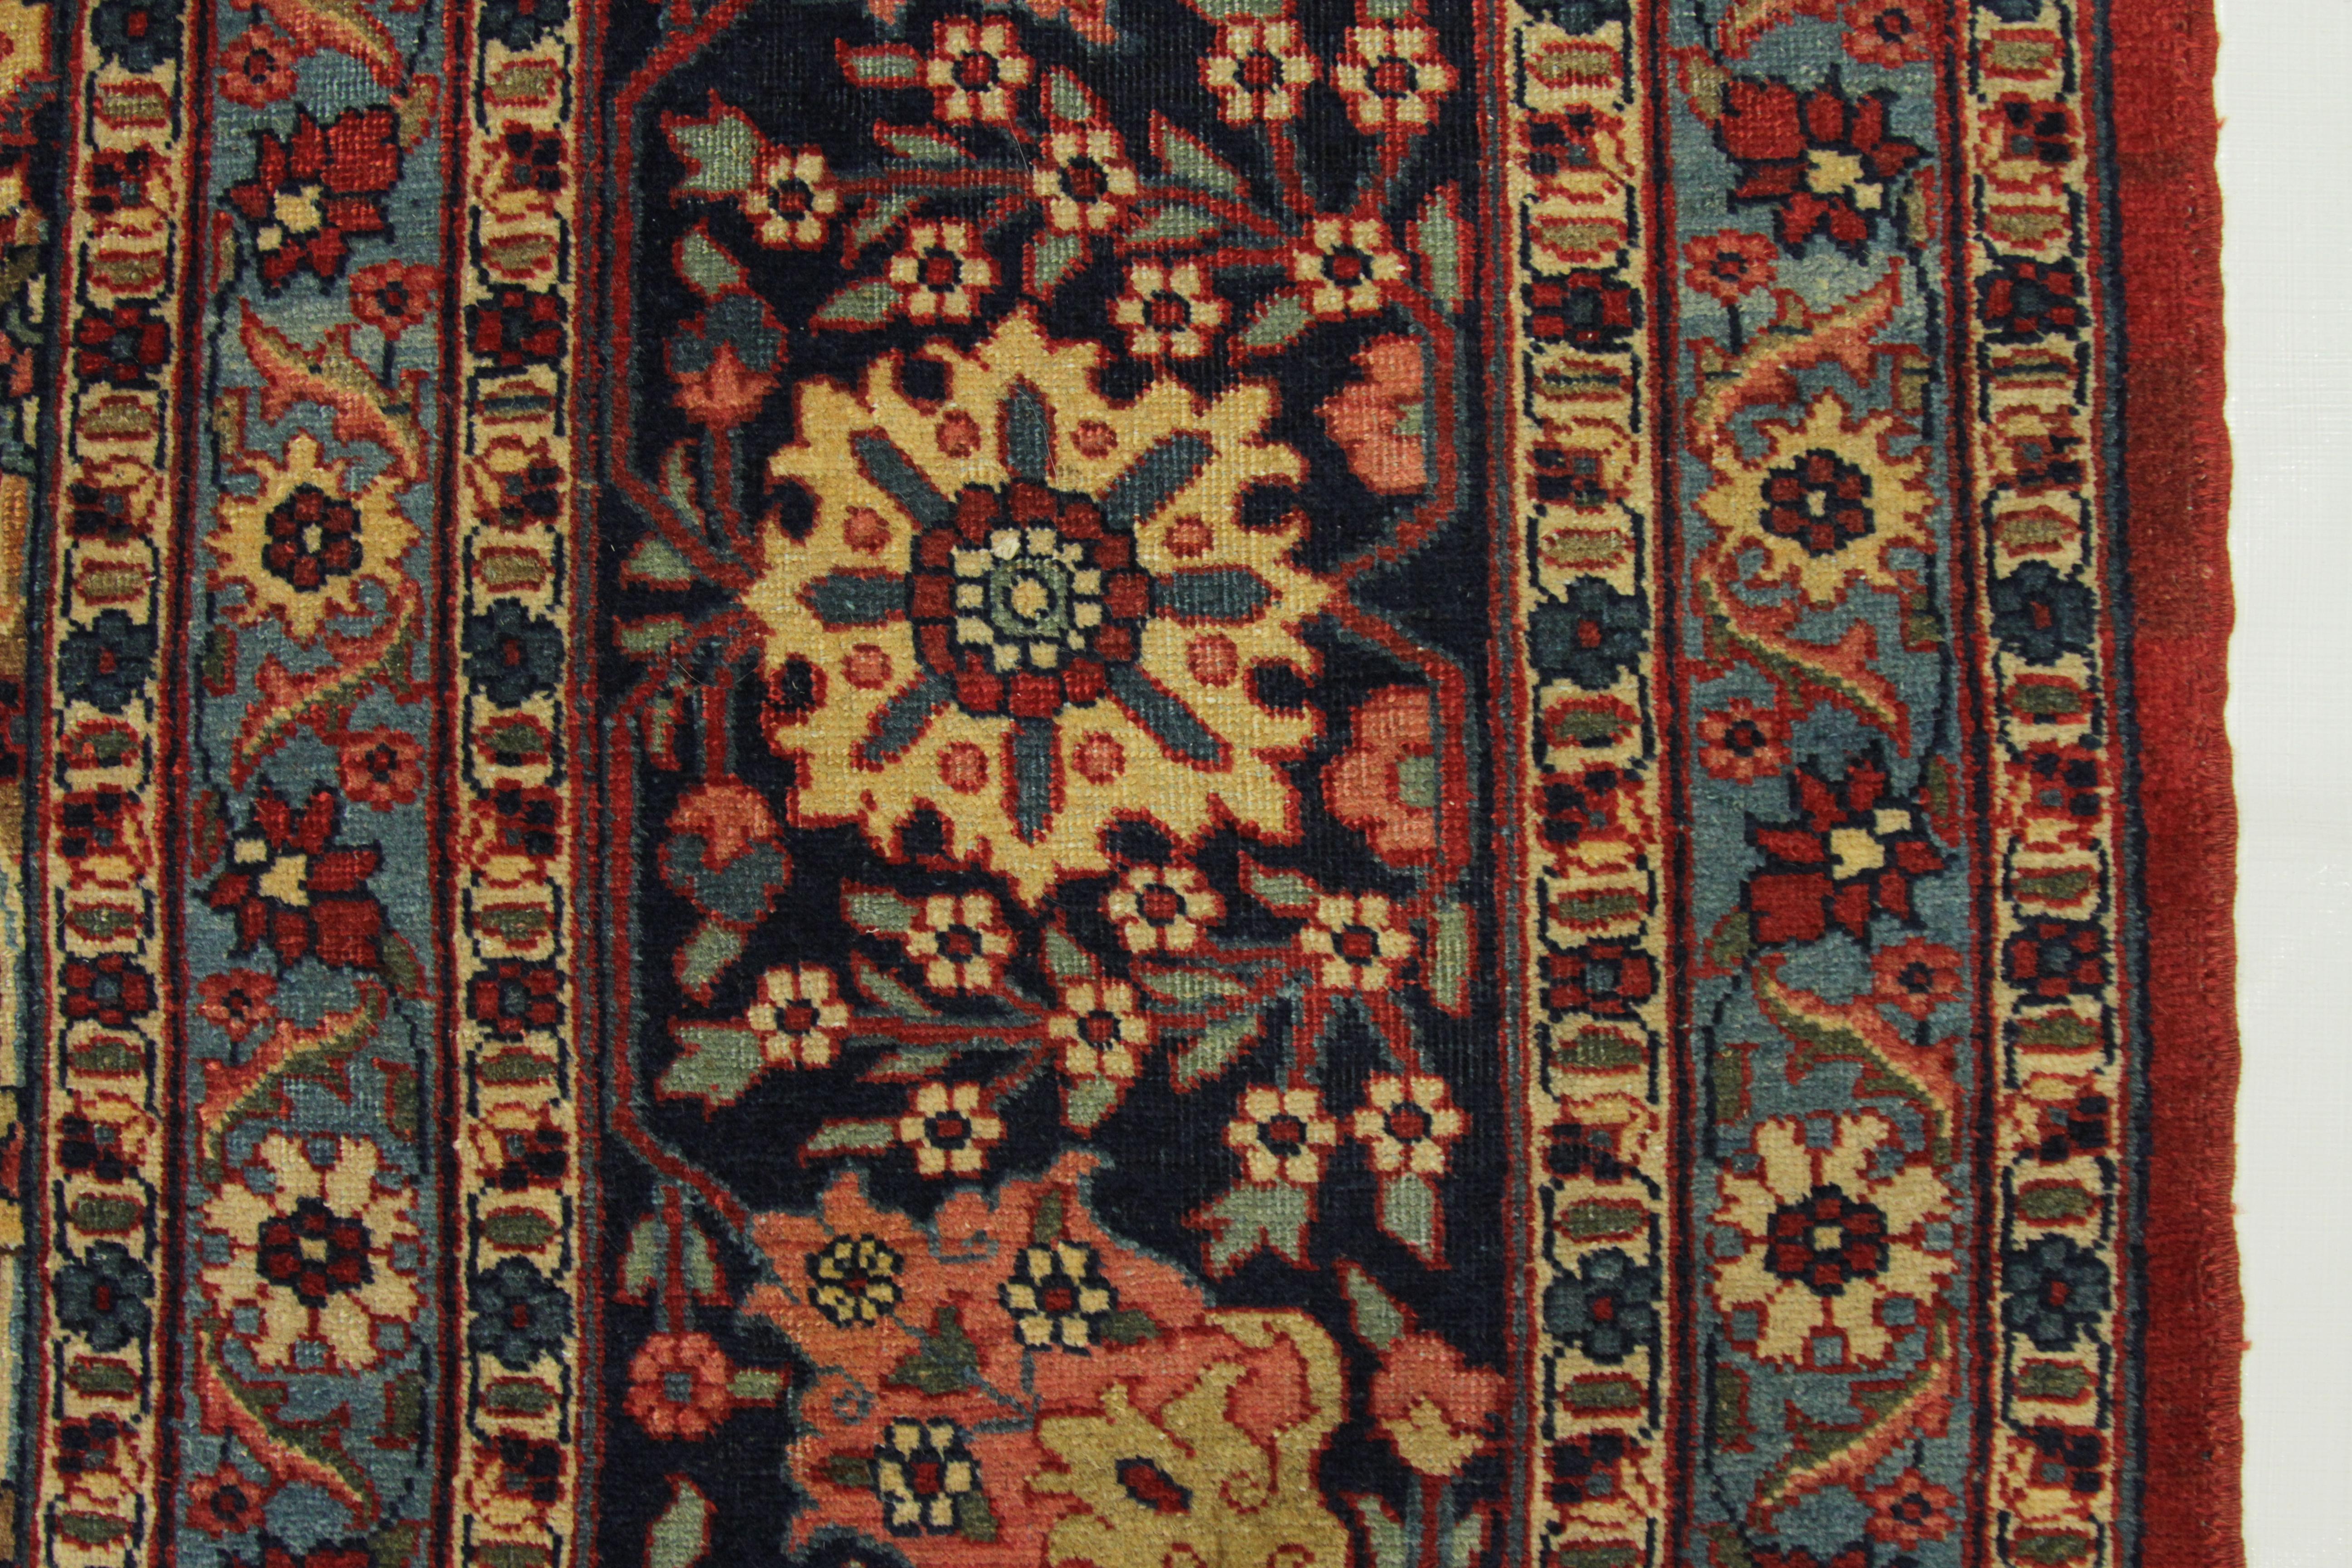 Wool 1940s Antique Persian Tabriz Rug with Jewel-Like ‘Herati’ Floral Patterns  For Sale